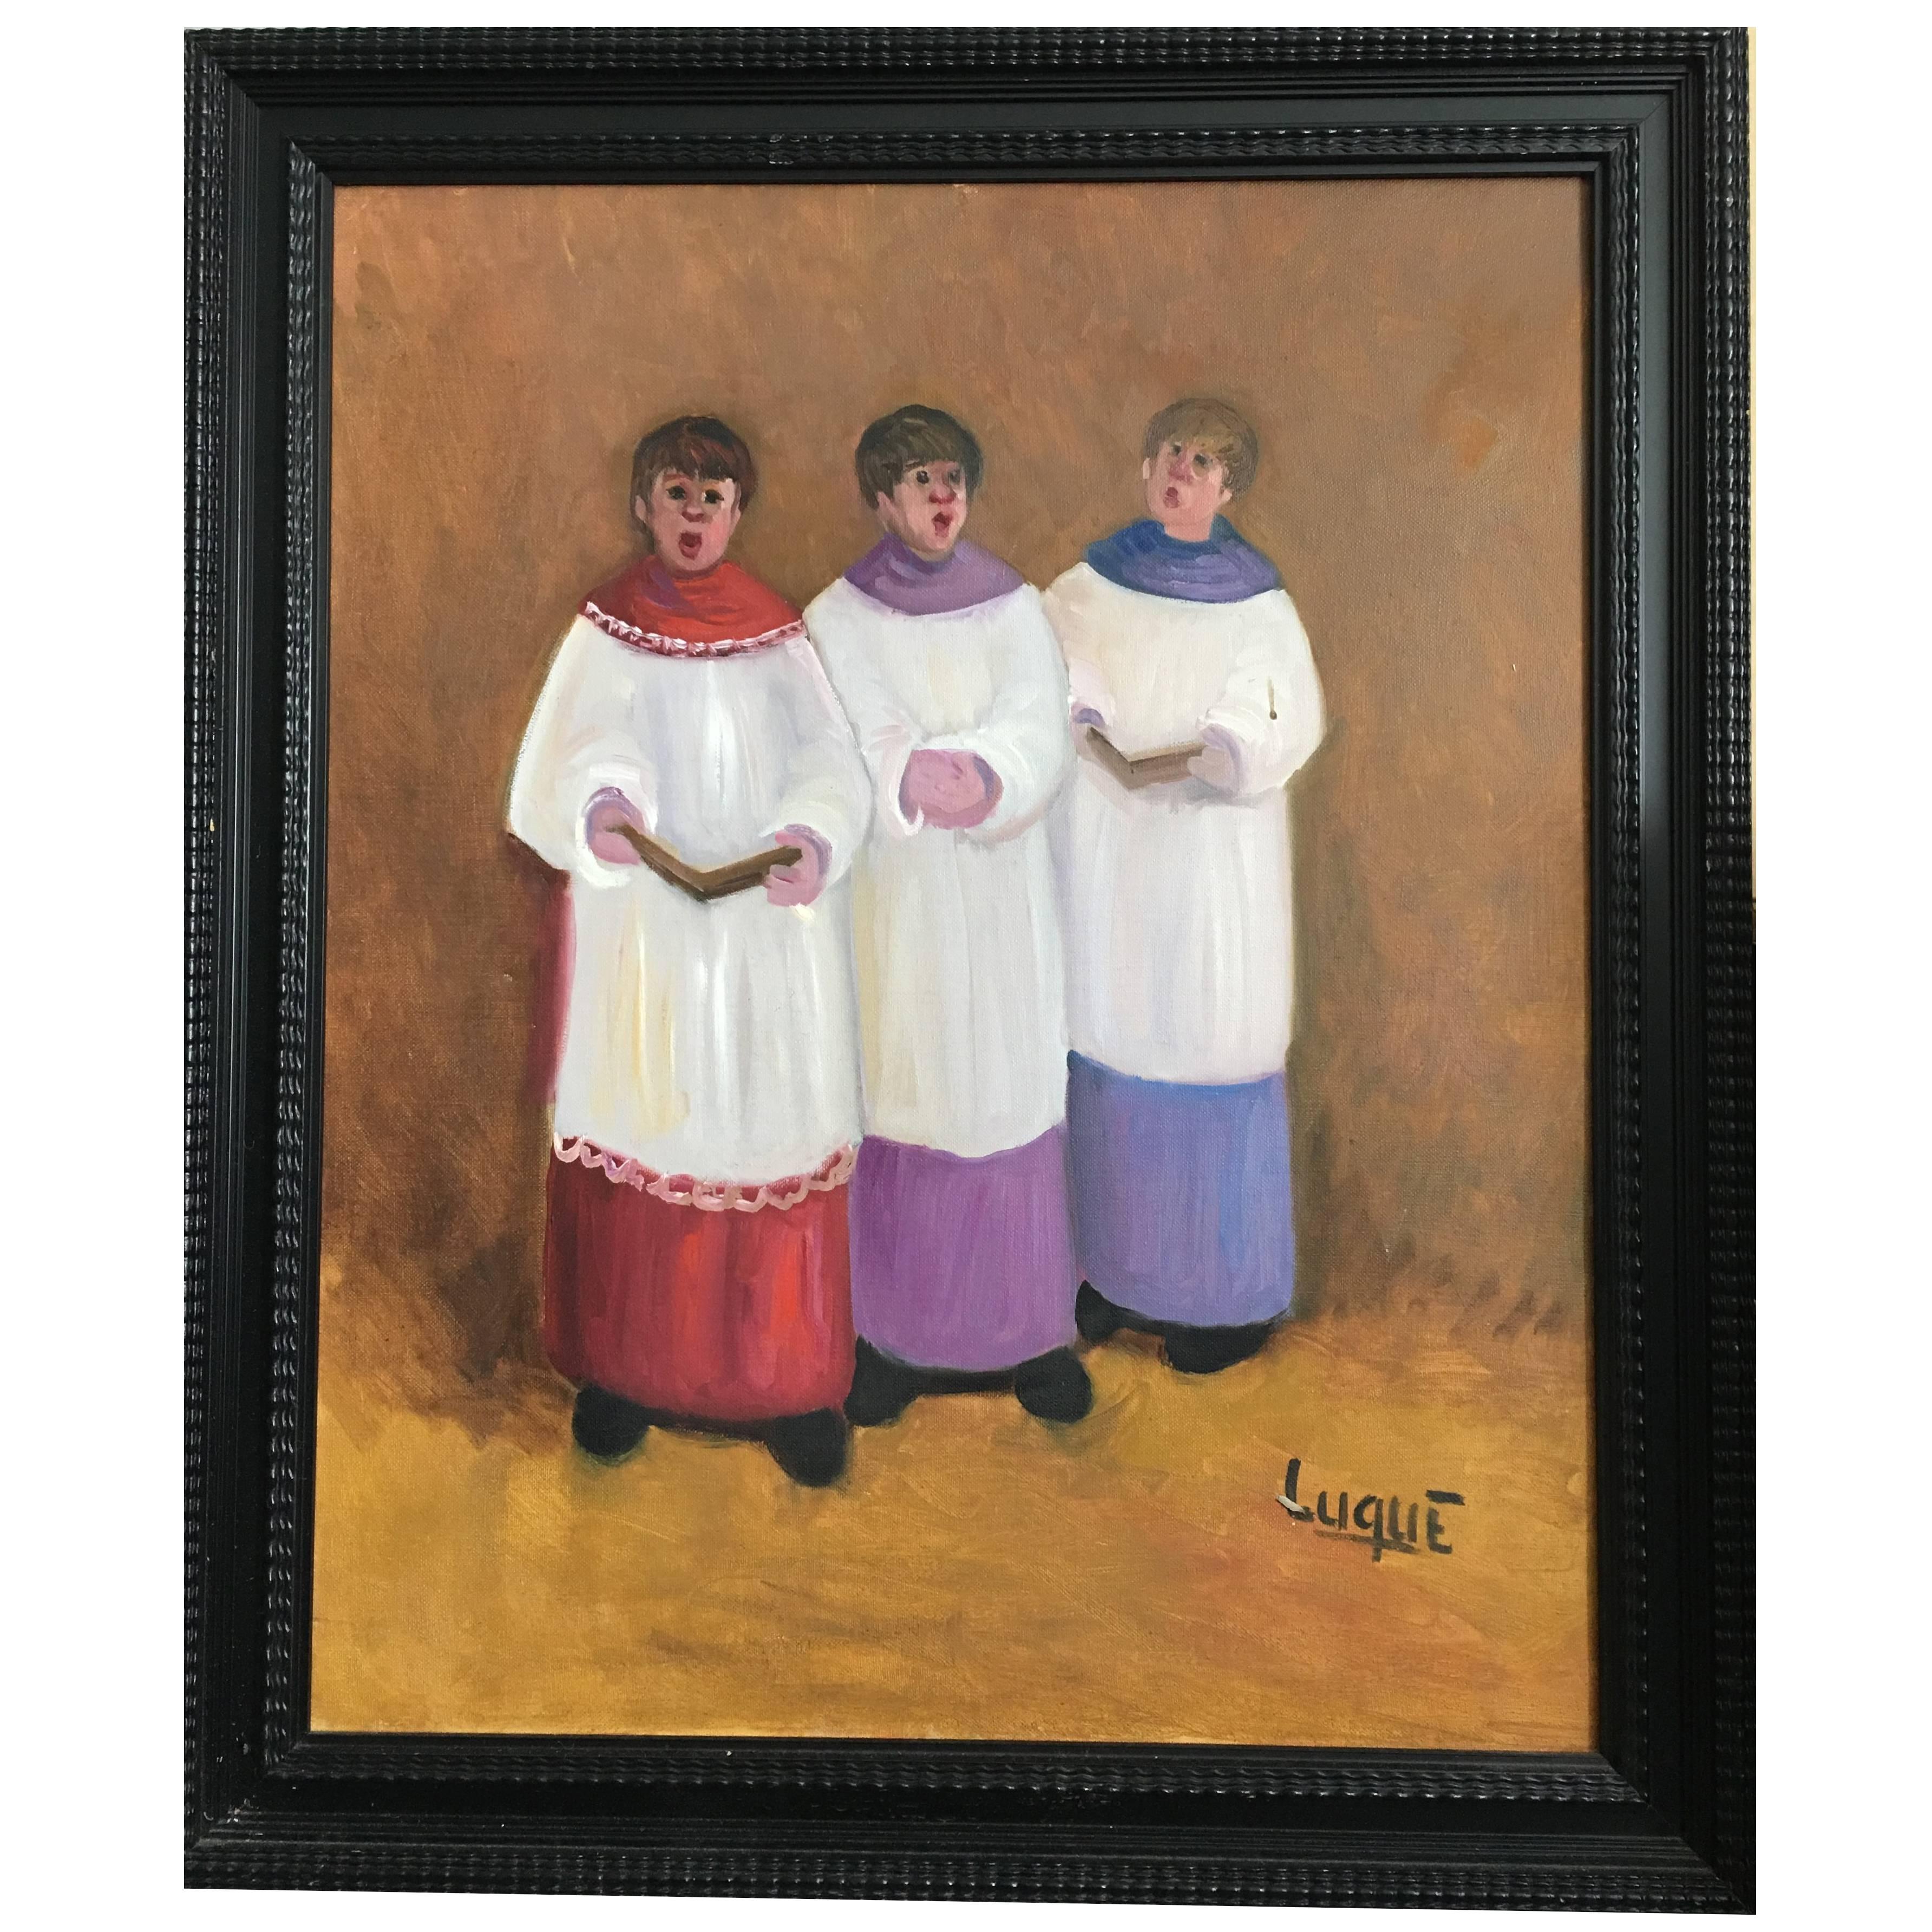 Choirboys Singing in Altar by Luque, Spain